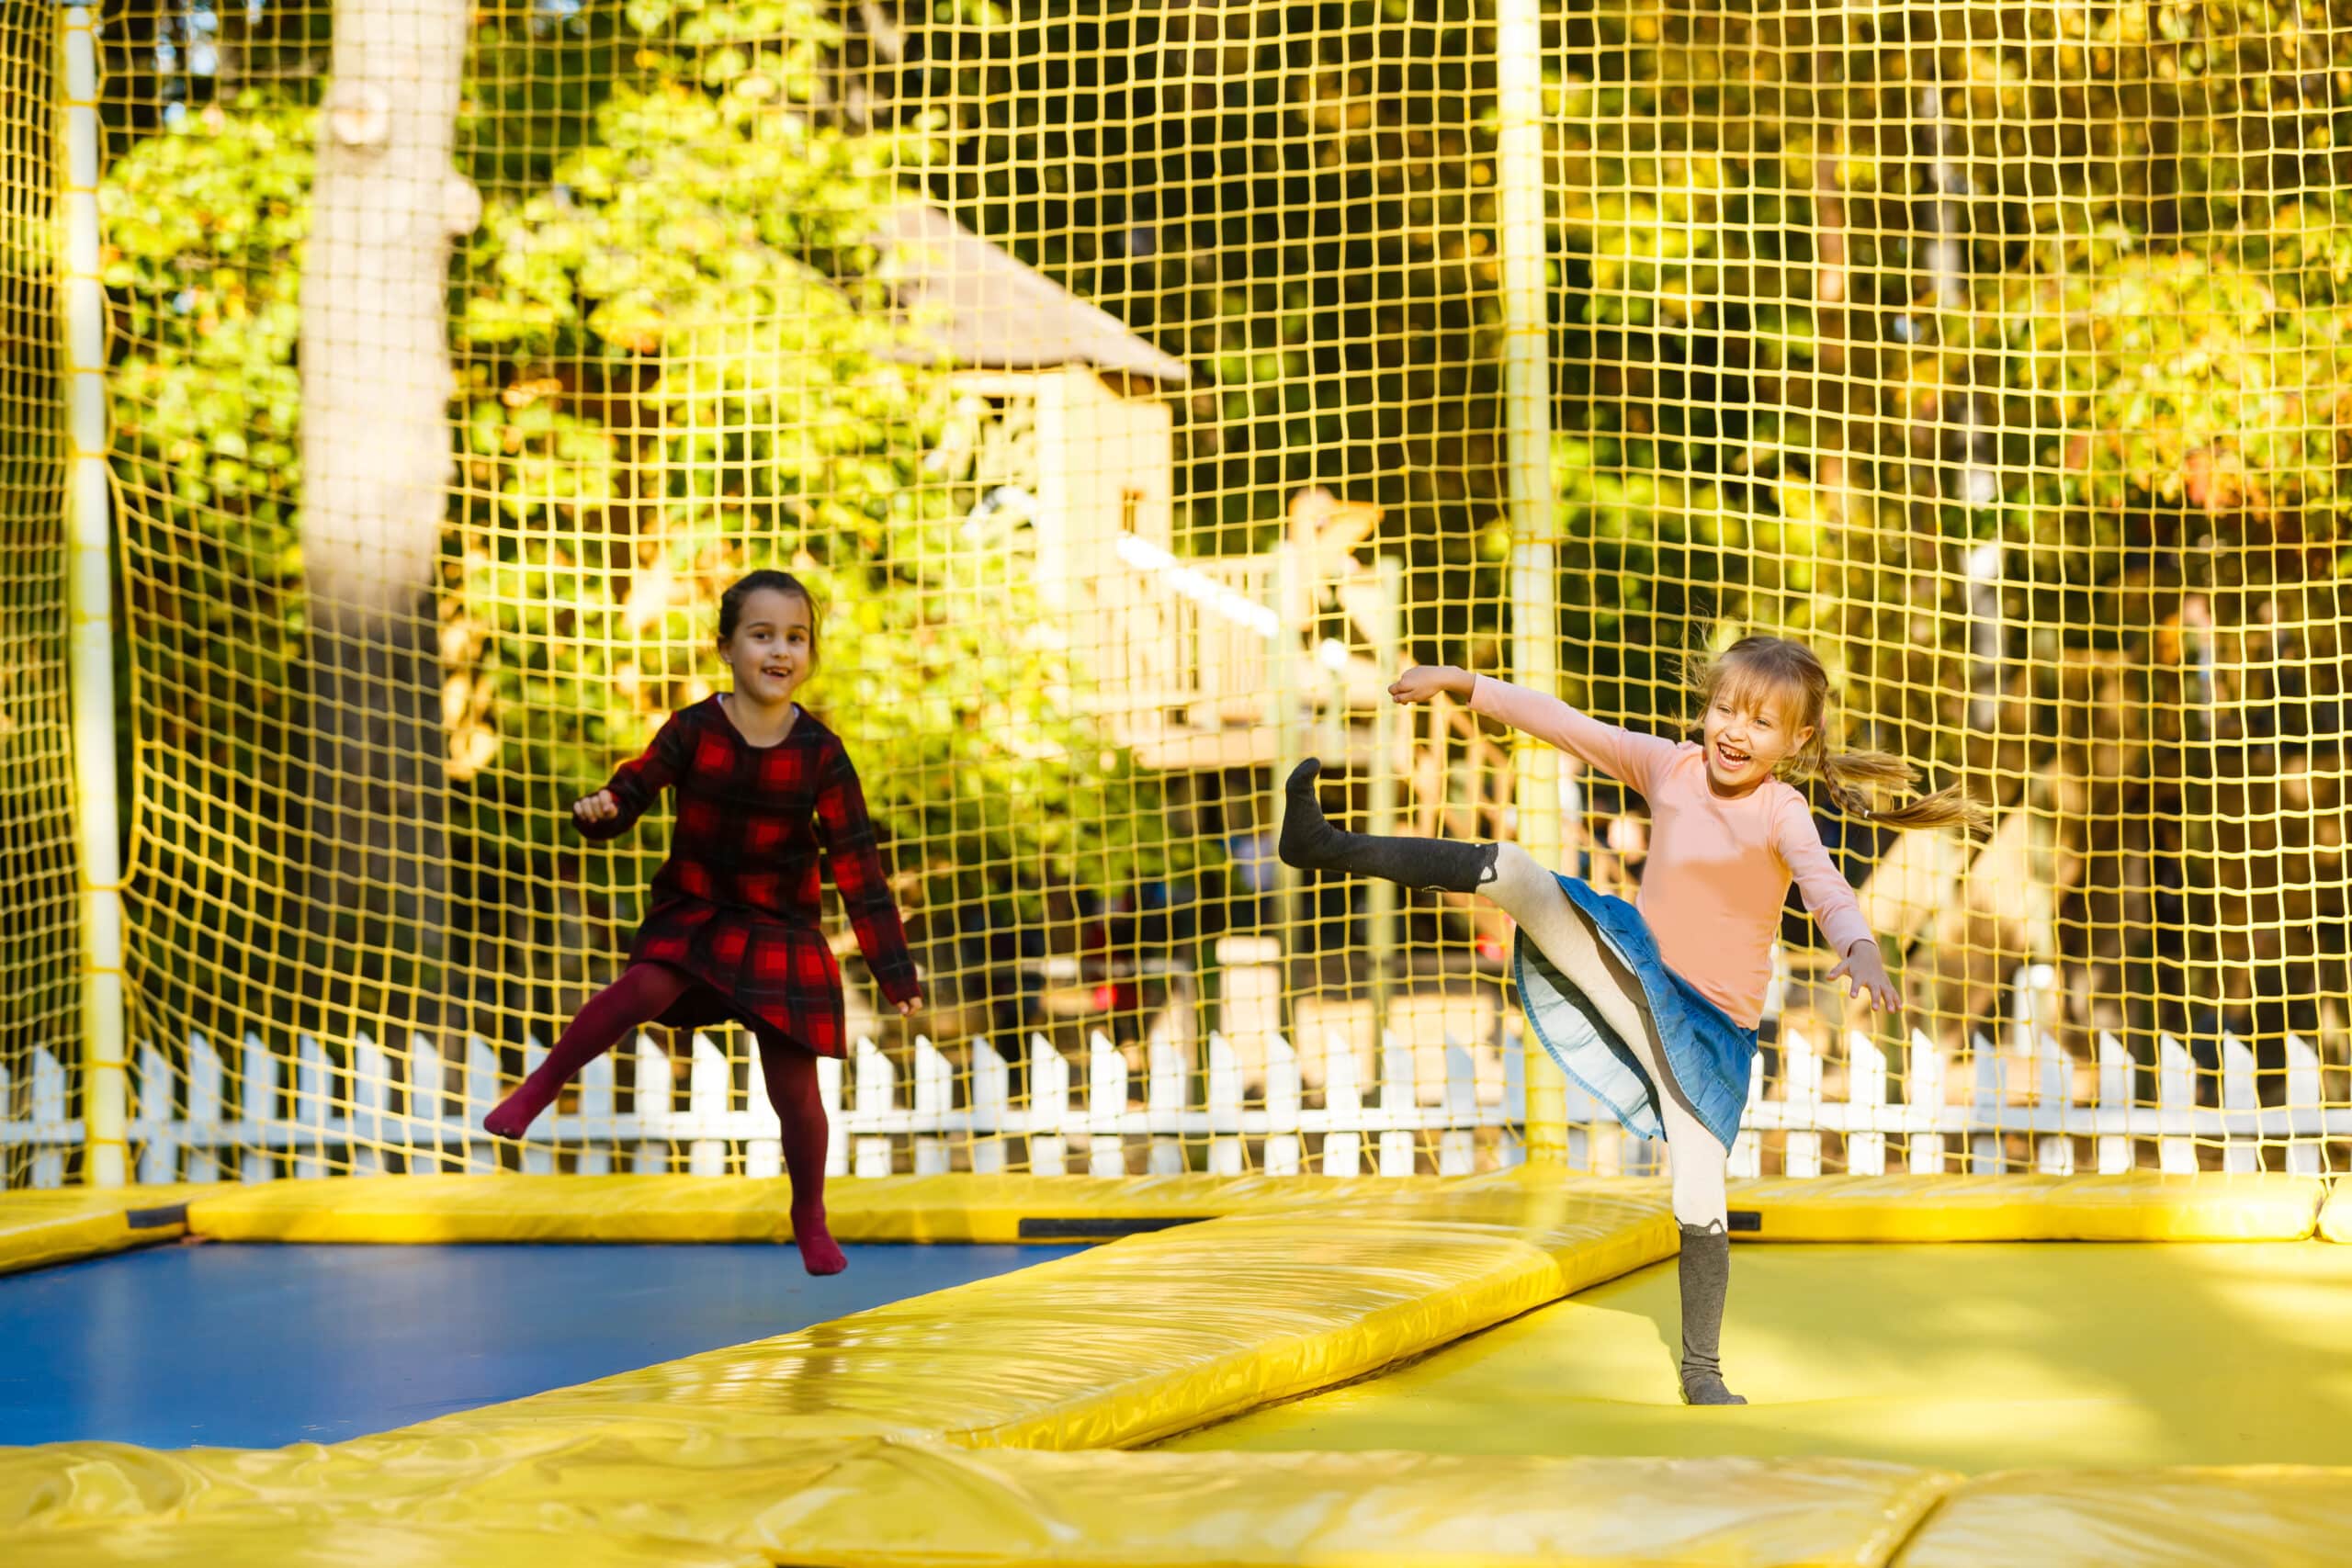 www.appr.com : What is the best size trampoline for a 10 year old?